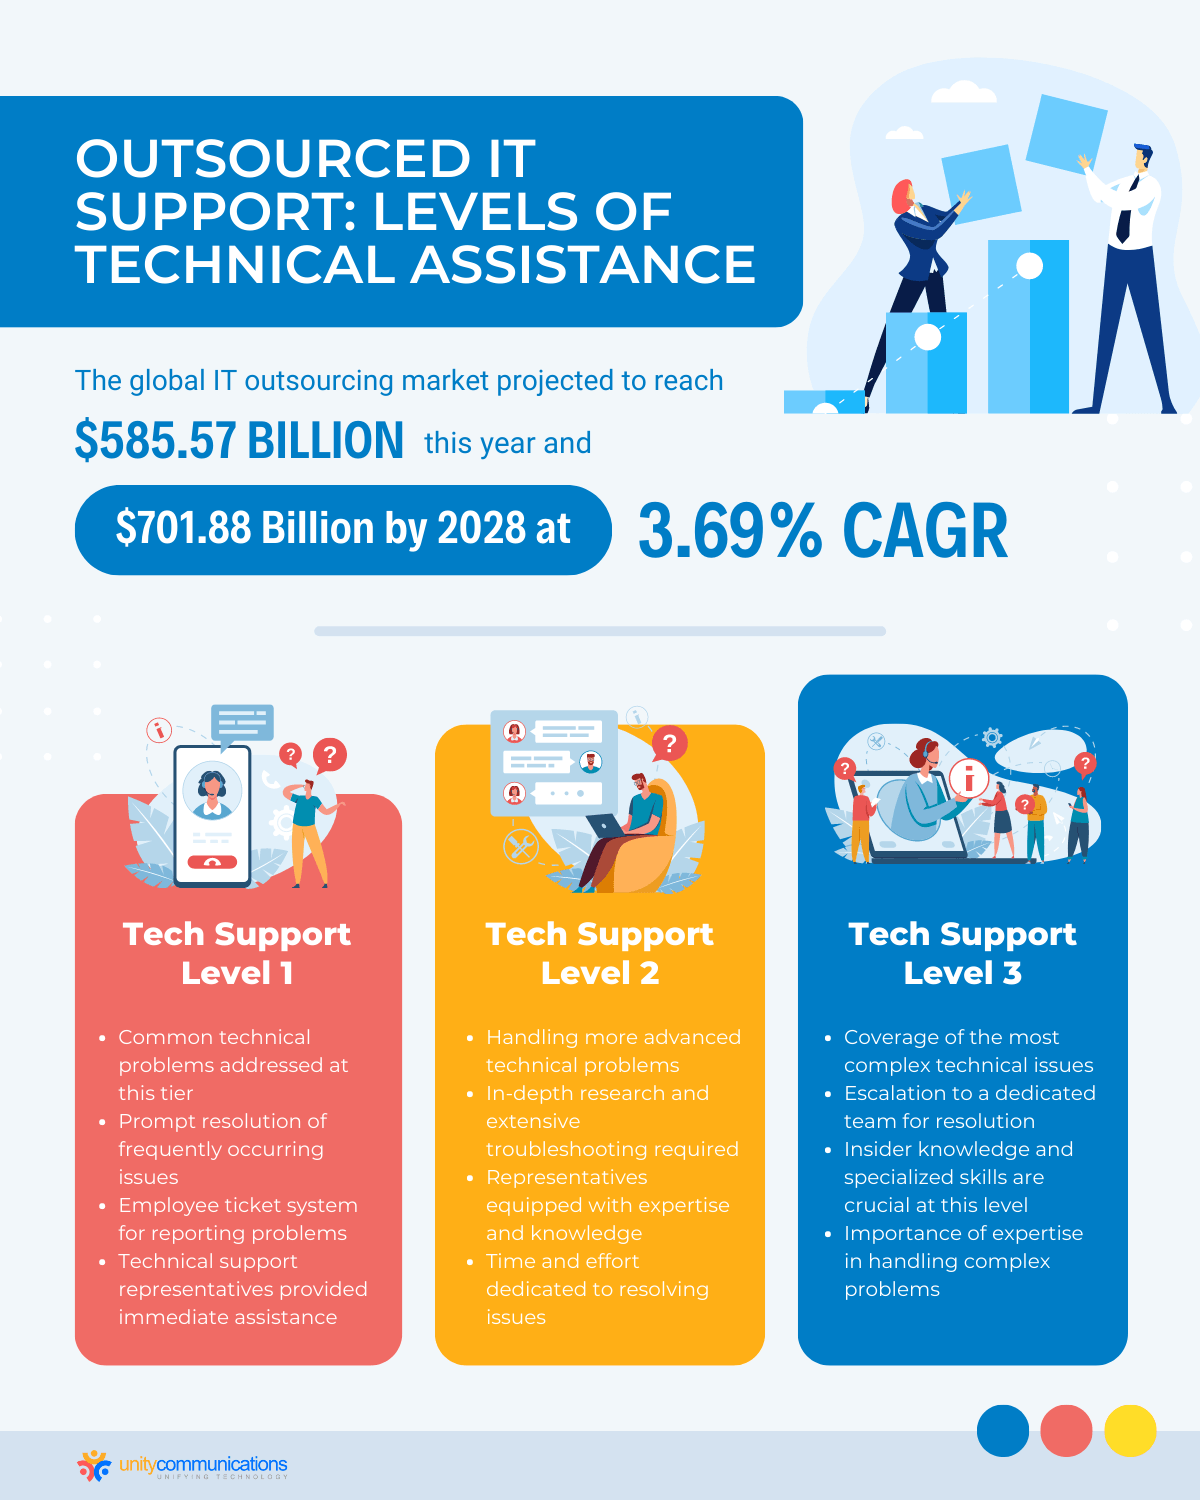 Outsourced IT Support Levels of Technical Assistance - Infographic